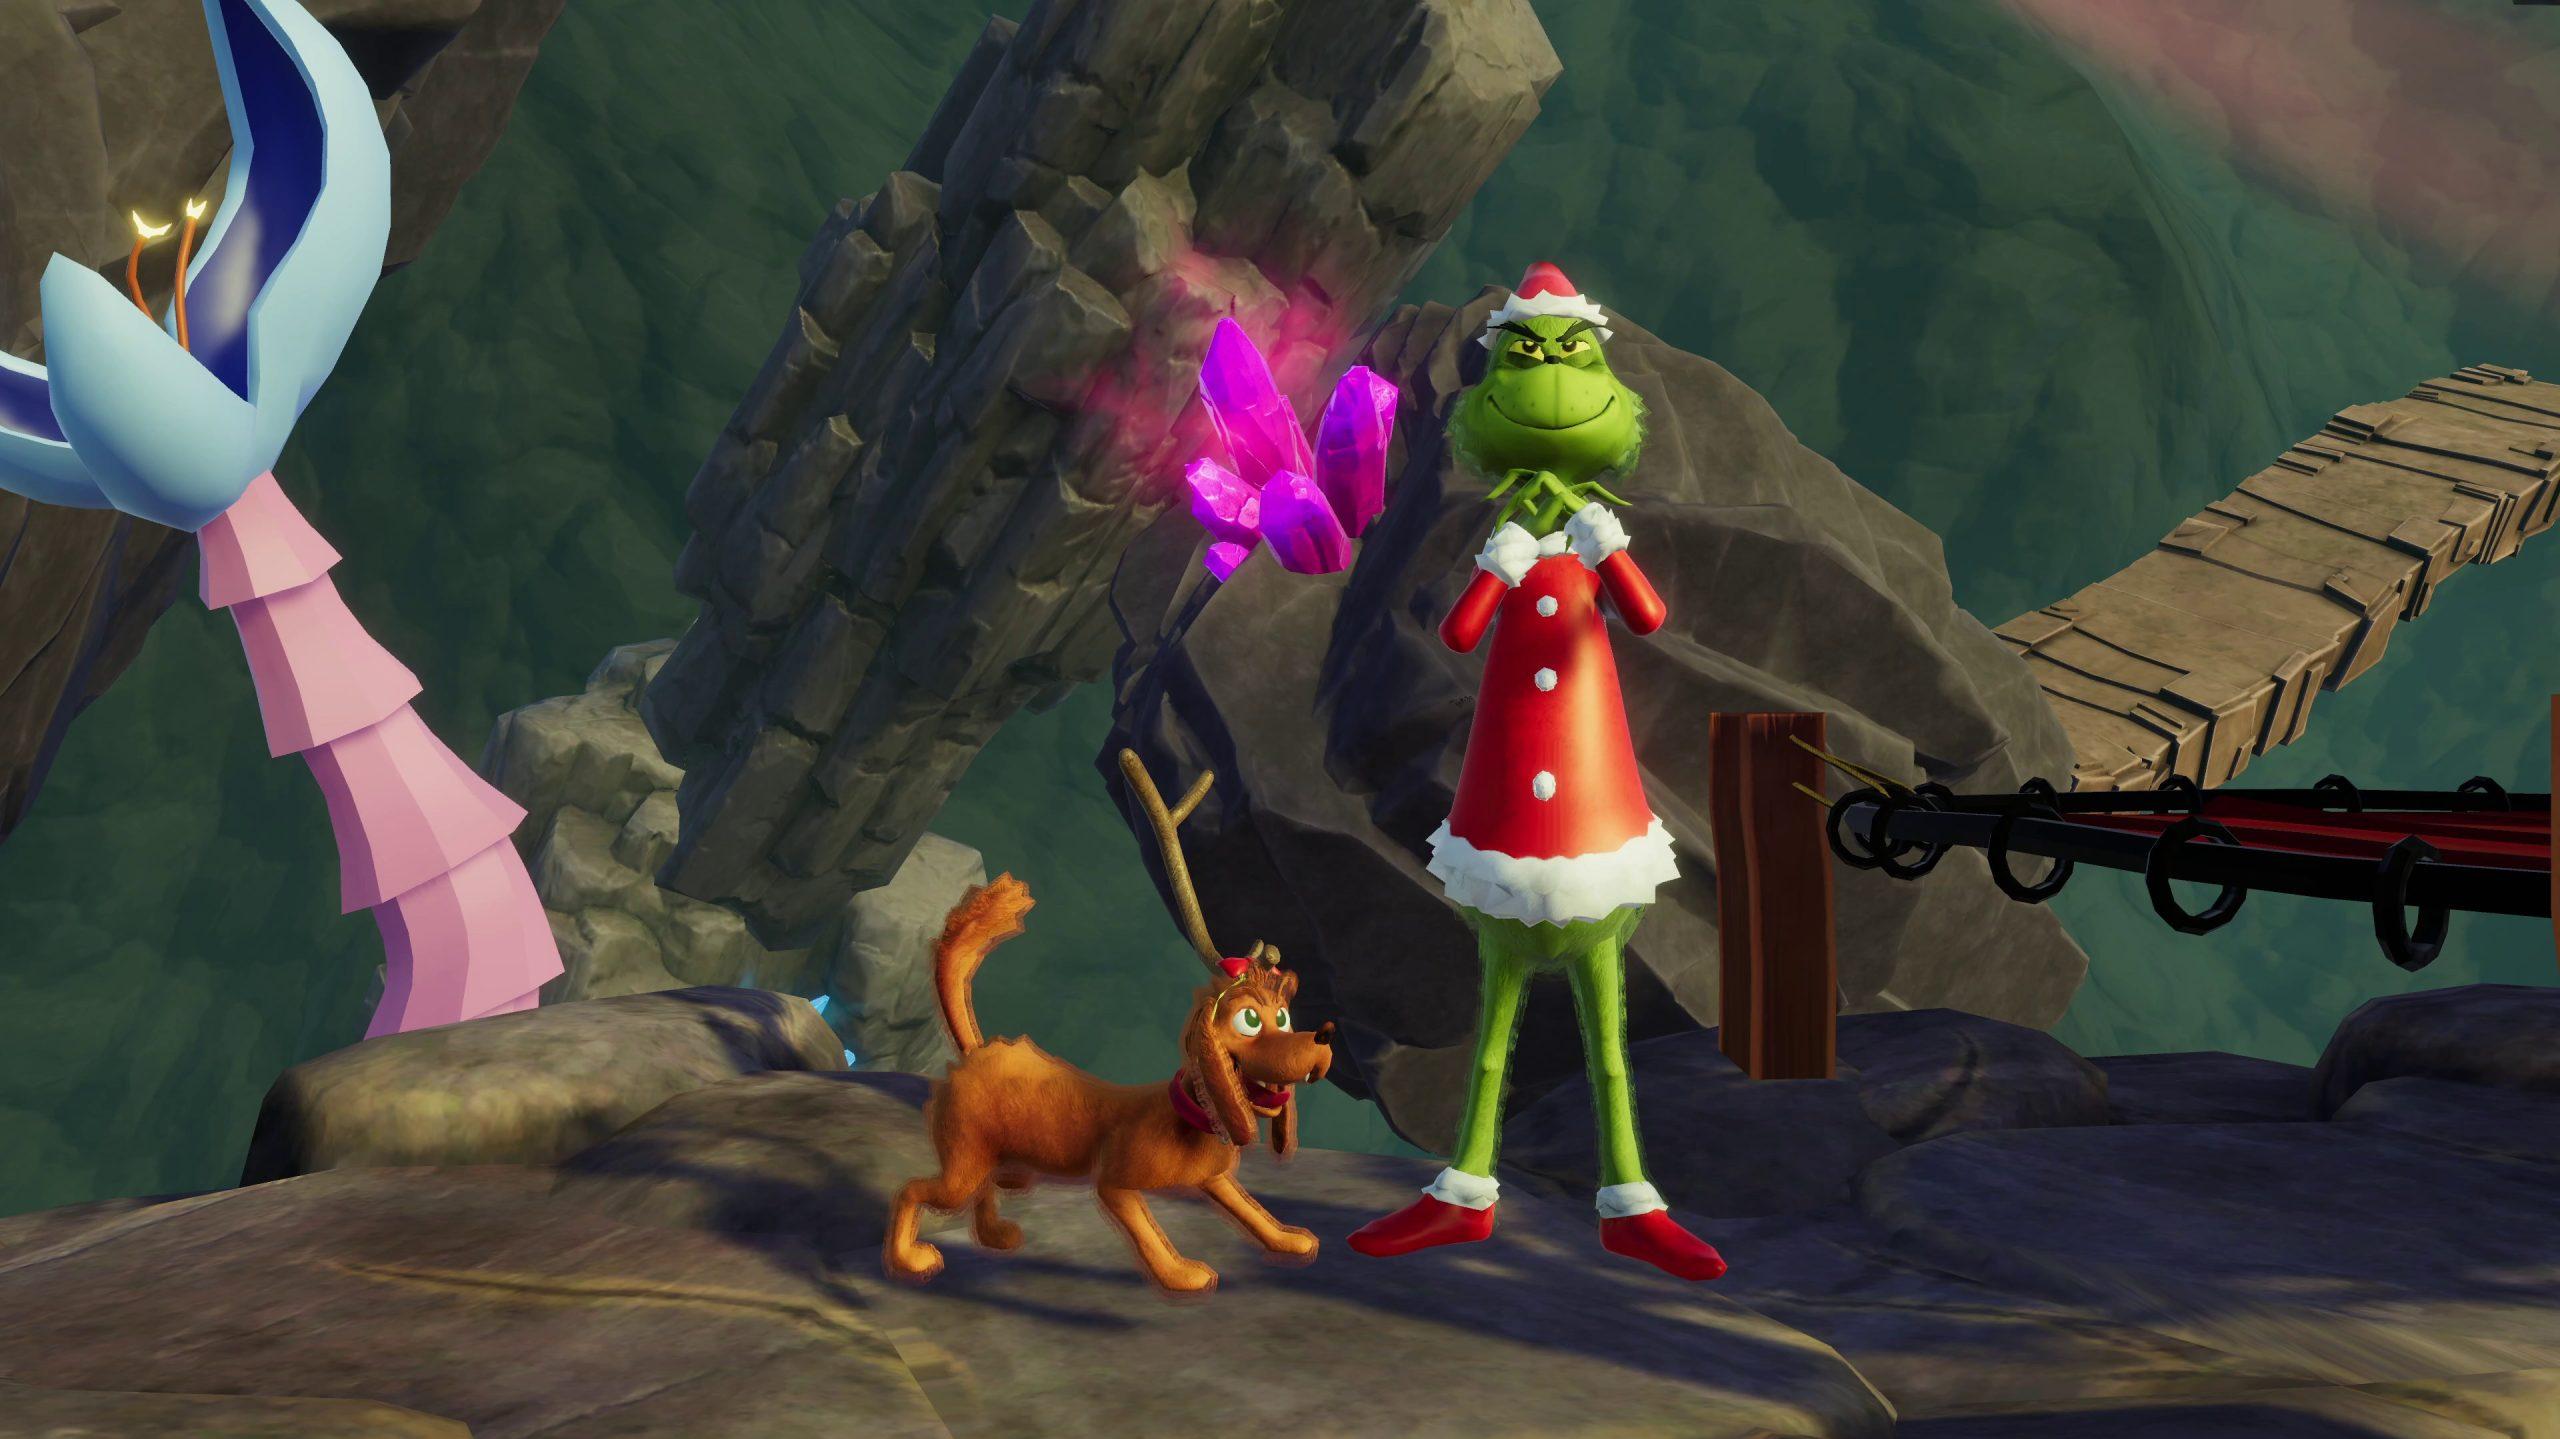 THE GRINCH CHRISTMAS ADVENTURESIS OUT NOW ON CONSOLES AND PC